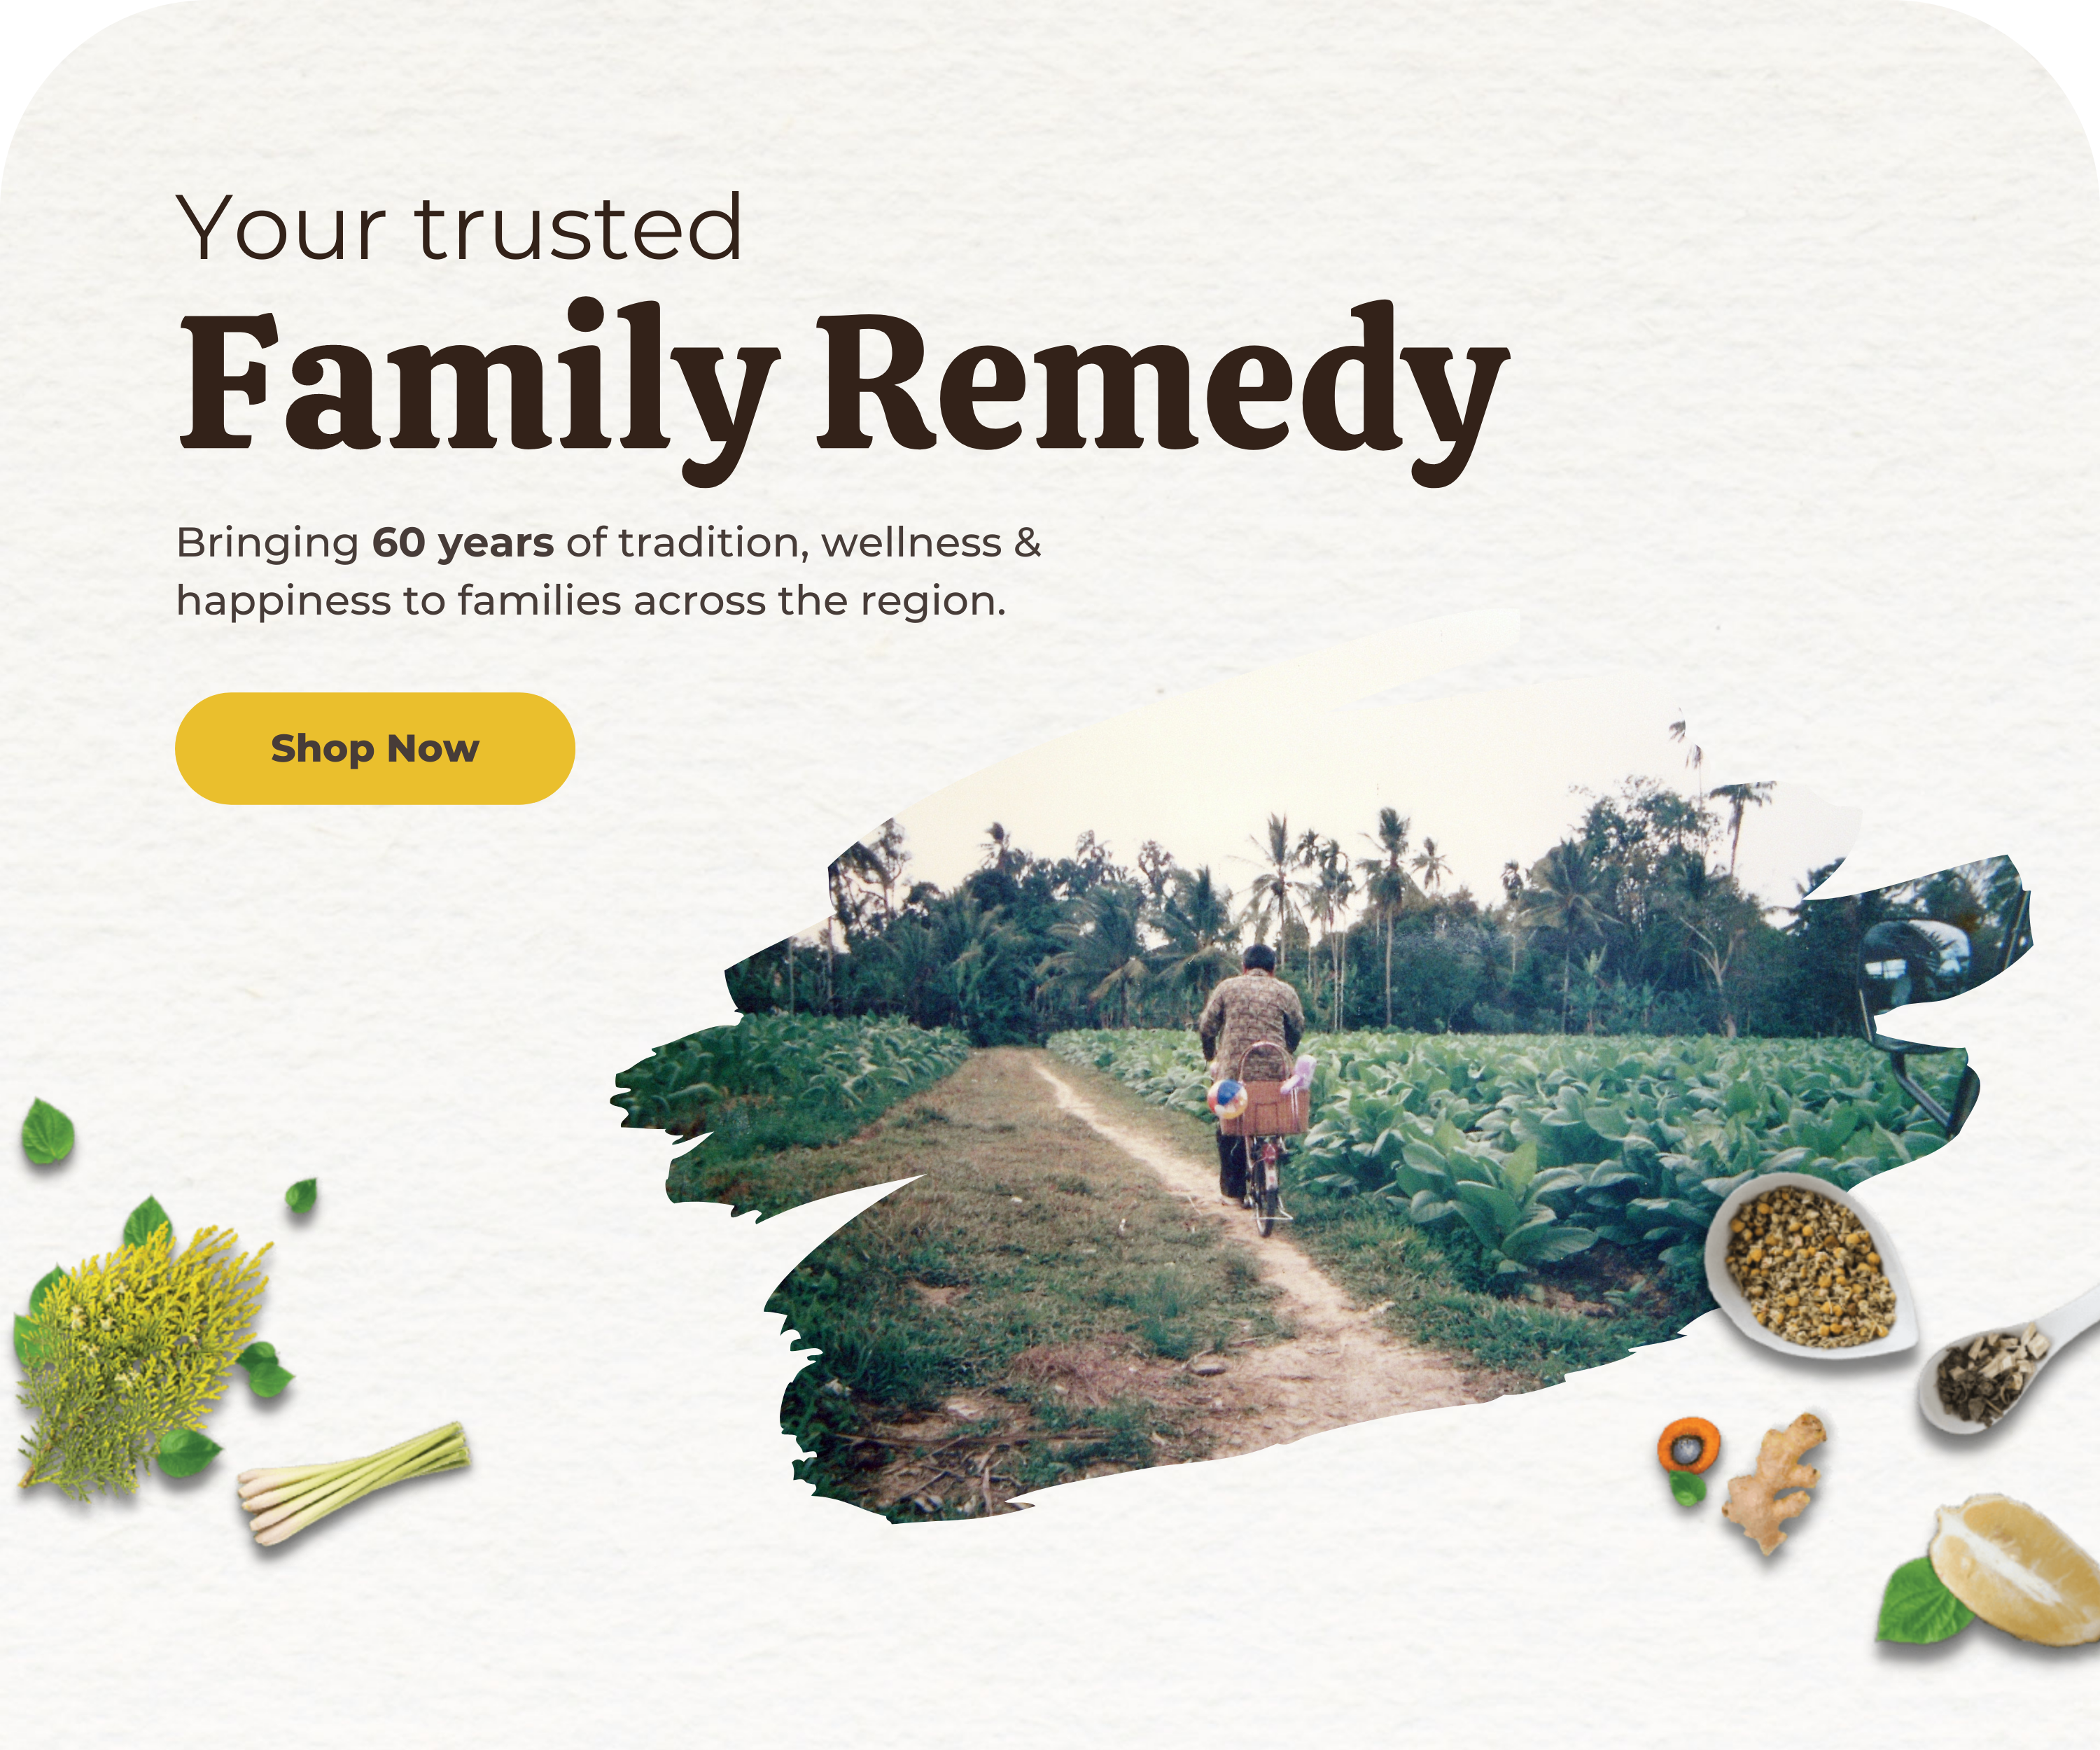 Your trusted Family Remedy, Bringing 60 years of tradition, wellness & happiness to families across the region.